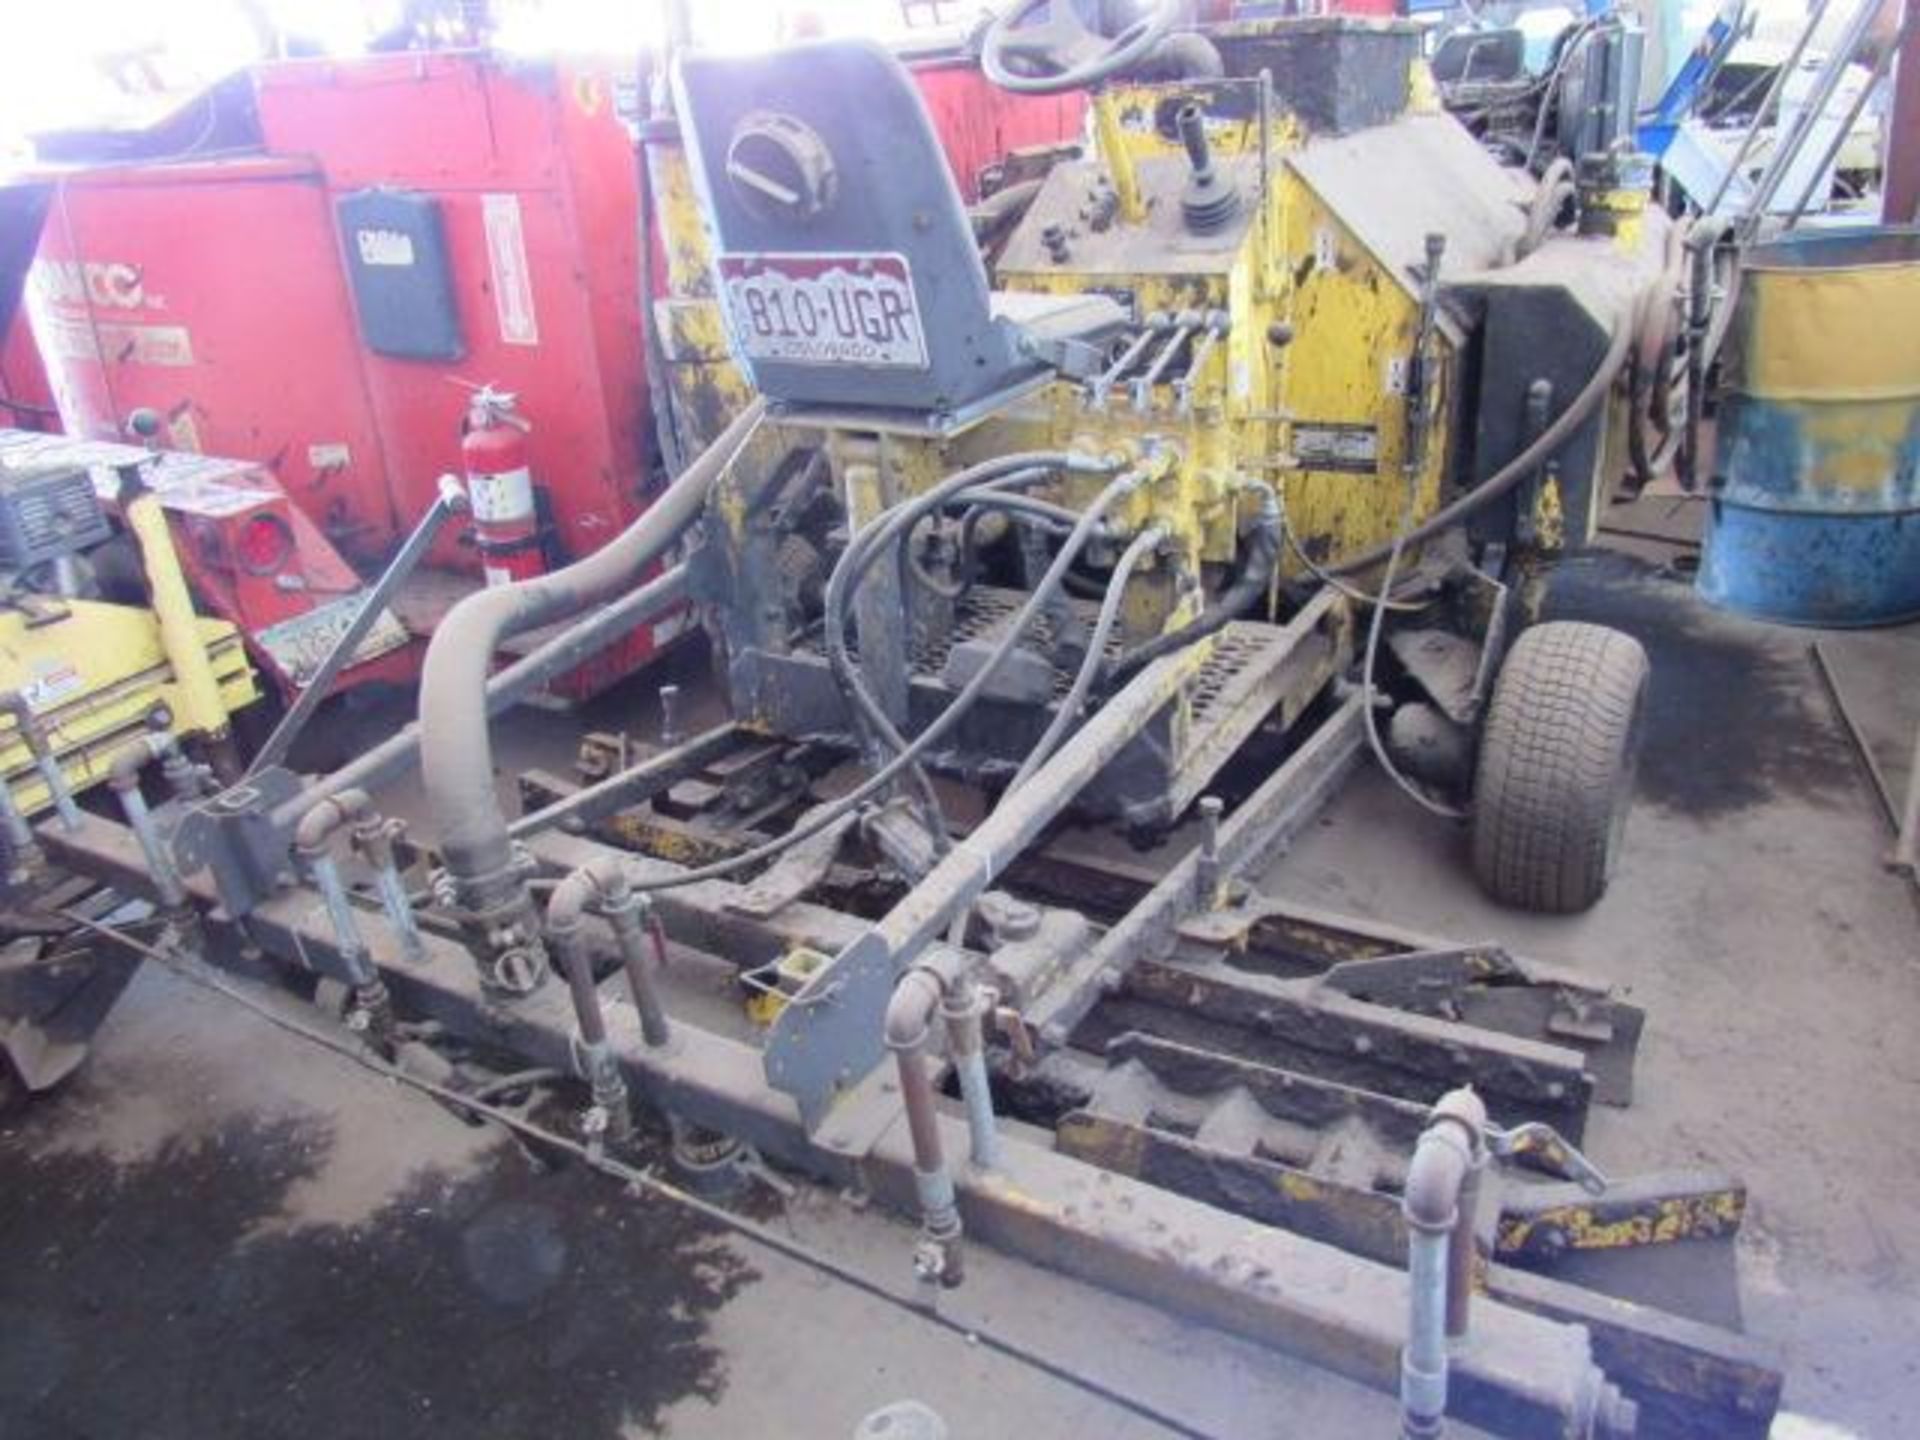 Anders 325RODA Sealcoat Applicator, S/N 325R0DA1505101258, 327 Hours Indicated, LOCATION: 7770 Vent - Image 2 of 7